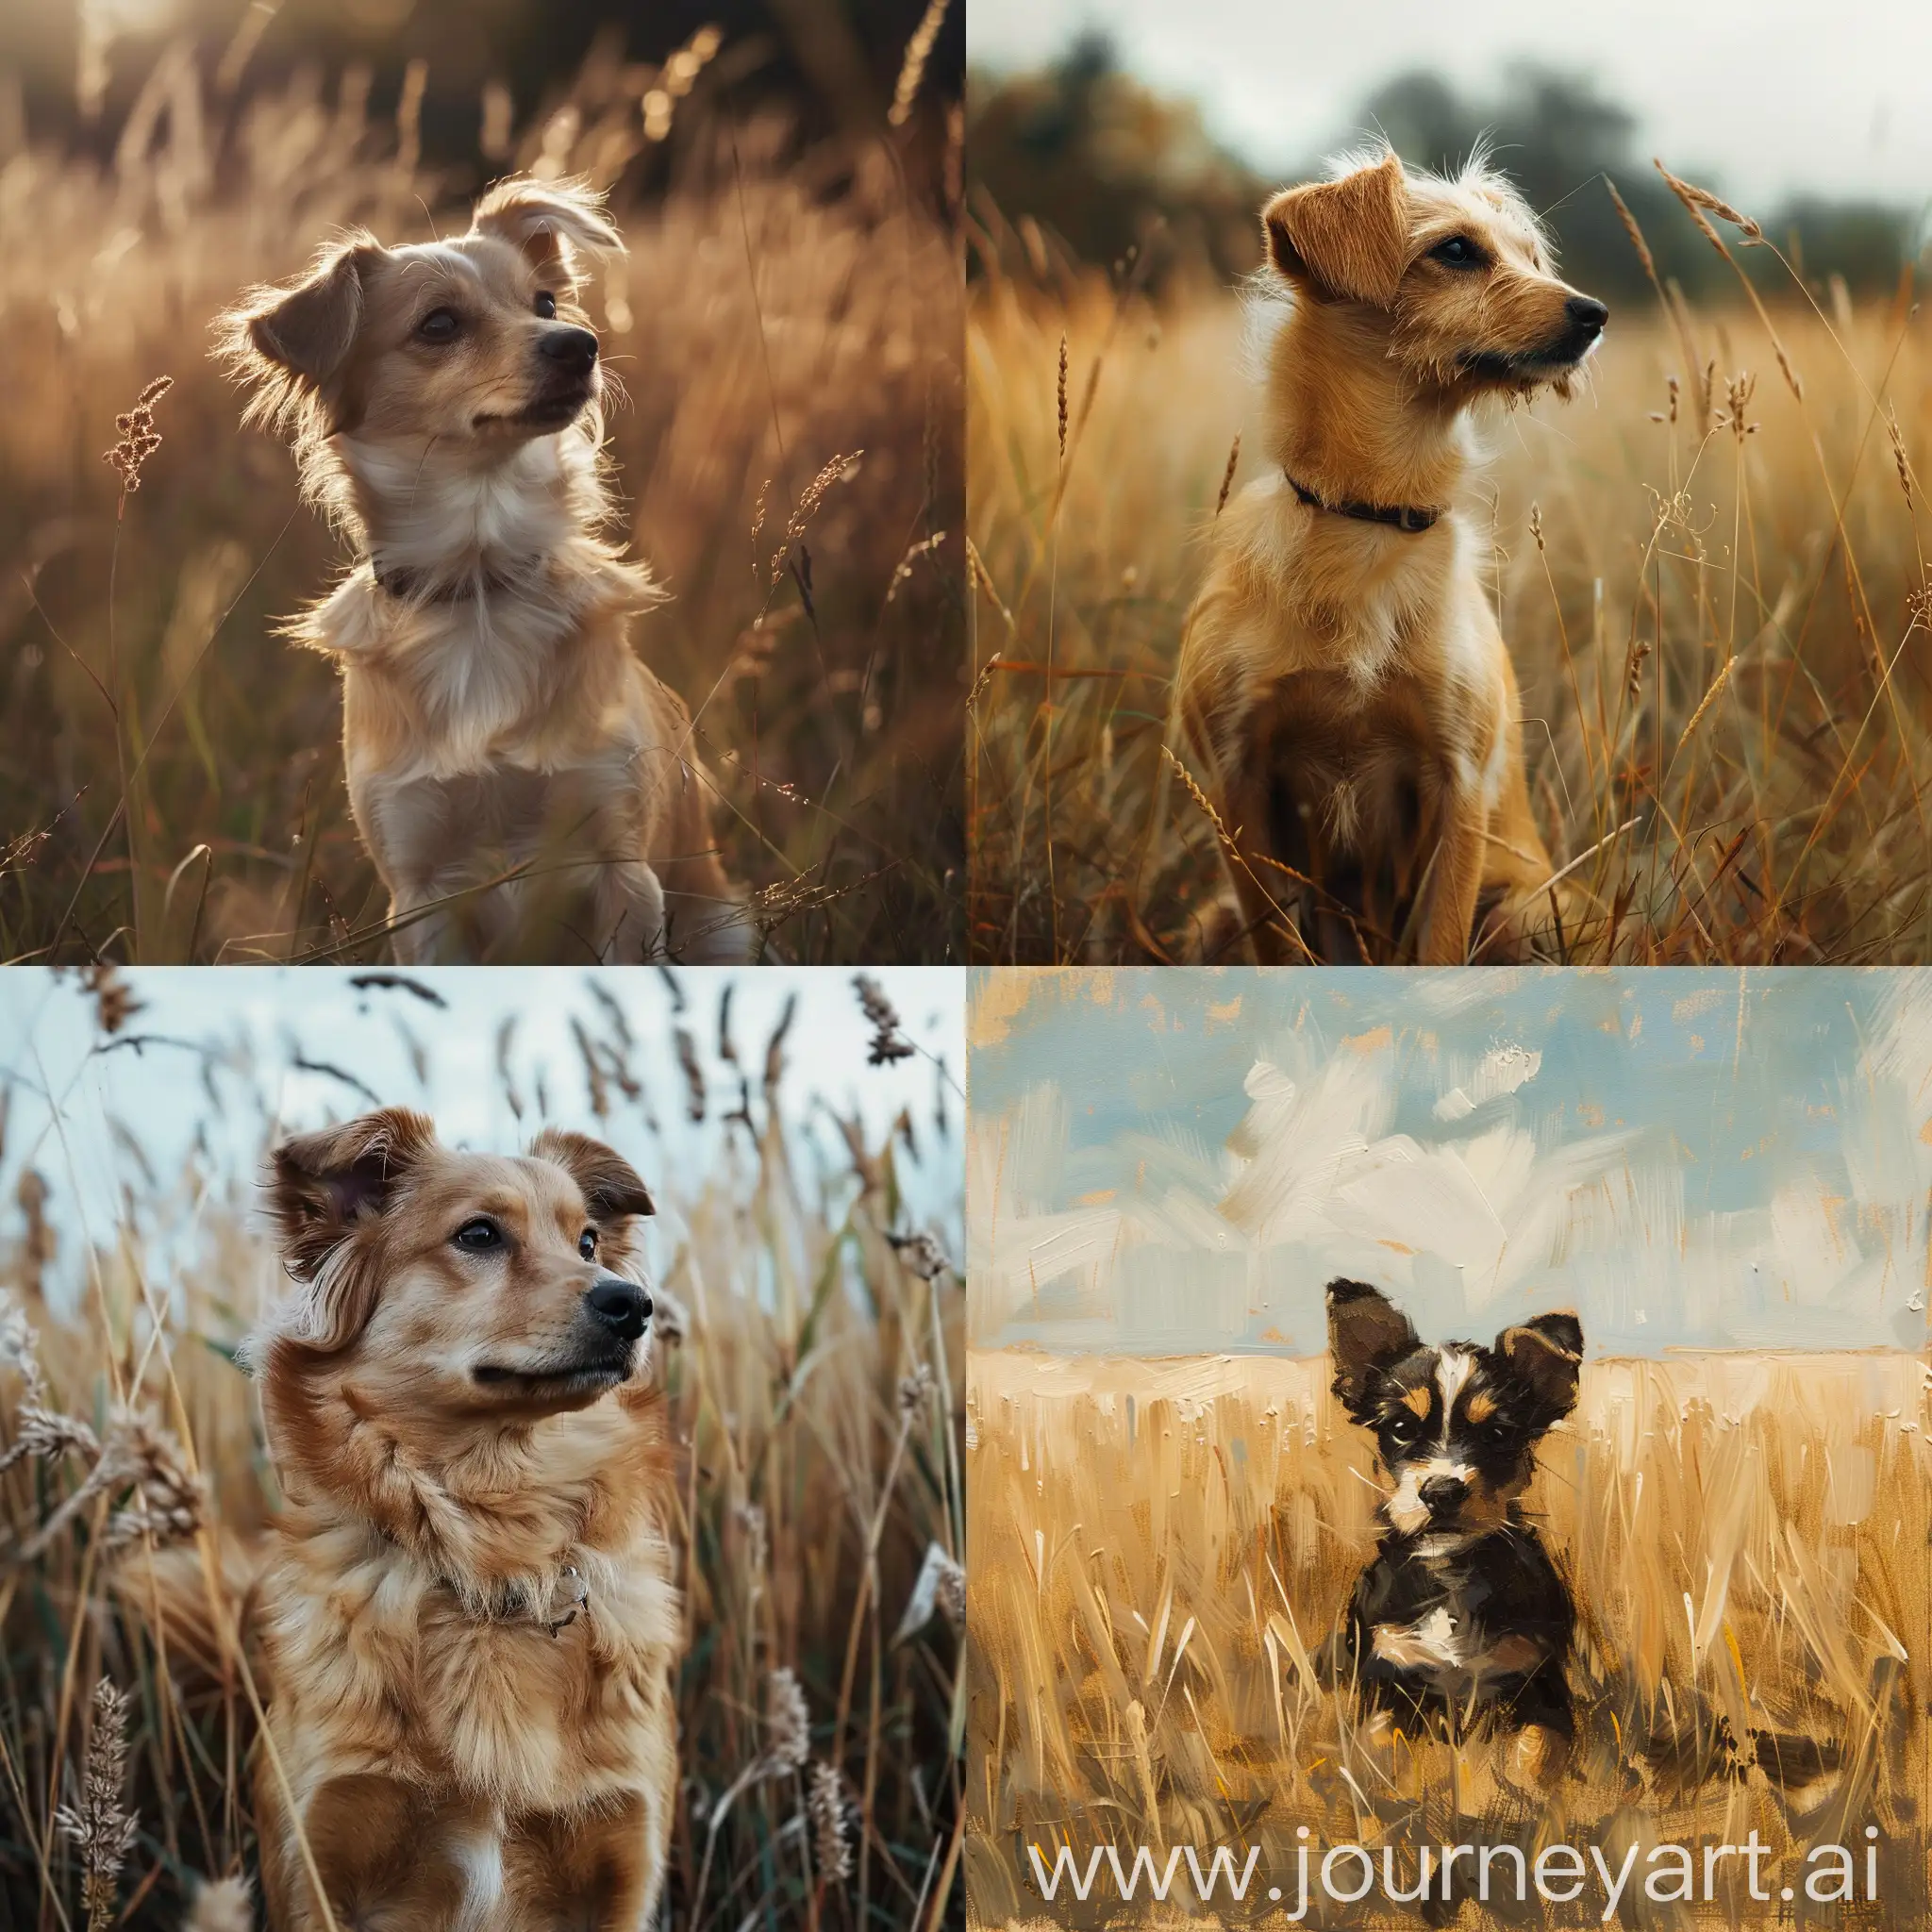 Playful-Puppy-Frolicking-in-a-Sunlit-Meadow